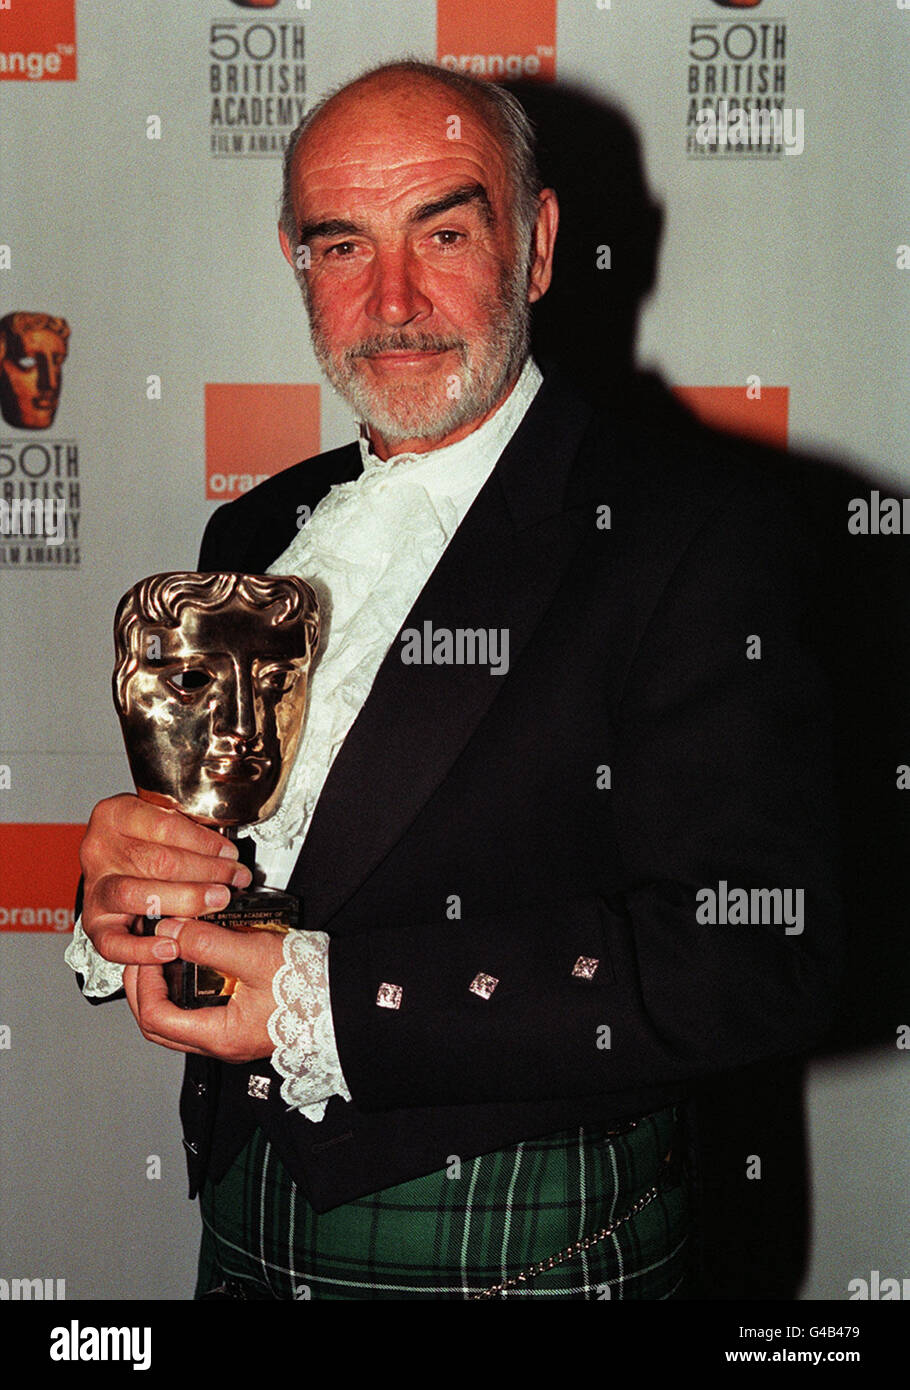 ACTOR SEAN CONNERY WITH HIS FELLOWSHIP AWARD AT THE 50TH BAFTA AWARDS IN LONDON * 2/4/2001: Sir Sean Connery who is set to join forces with Scotland's First Minister to persuade America that the country is 'open for business' despite the foot-and-mouth crisis it was revealed. The former James Bond star has been recruited by Henry McLeish to spearhead a drive to restore confidence in Scotland as a tourist destination during Tartan Week celebrations in the US. Stock Photo